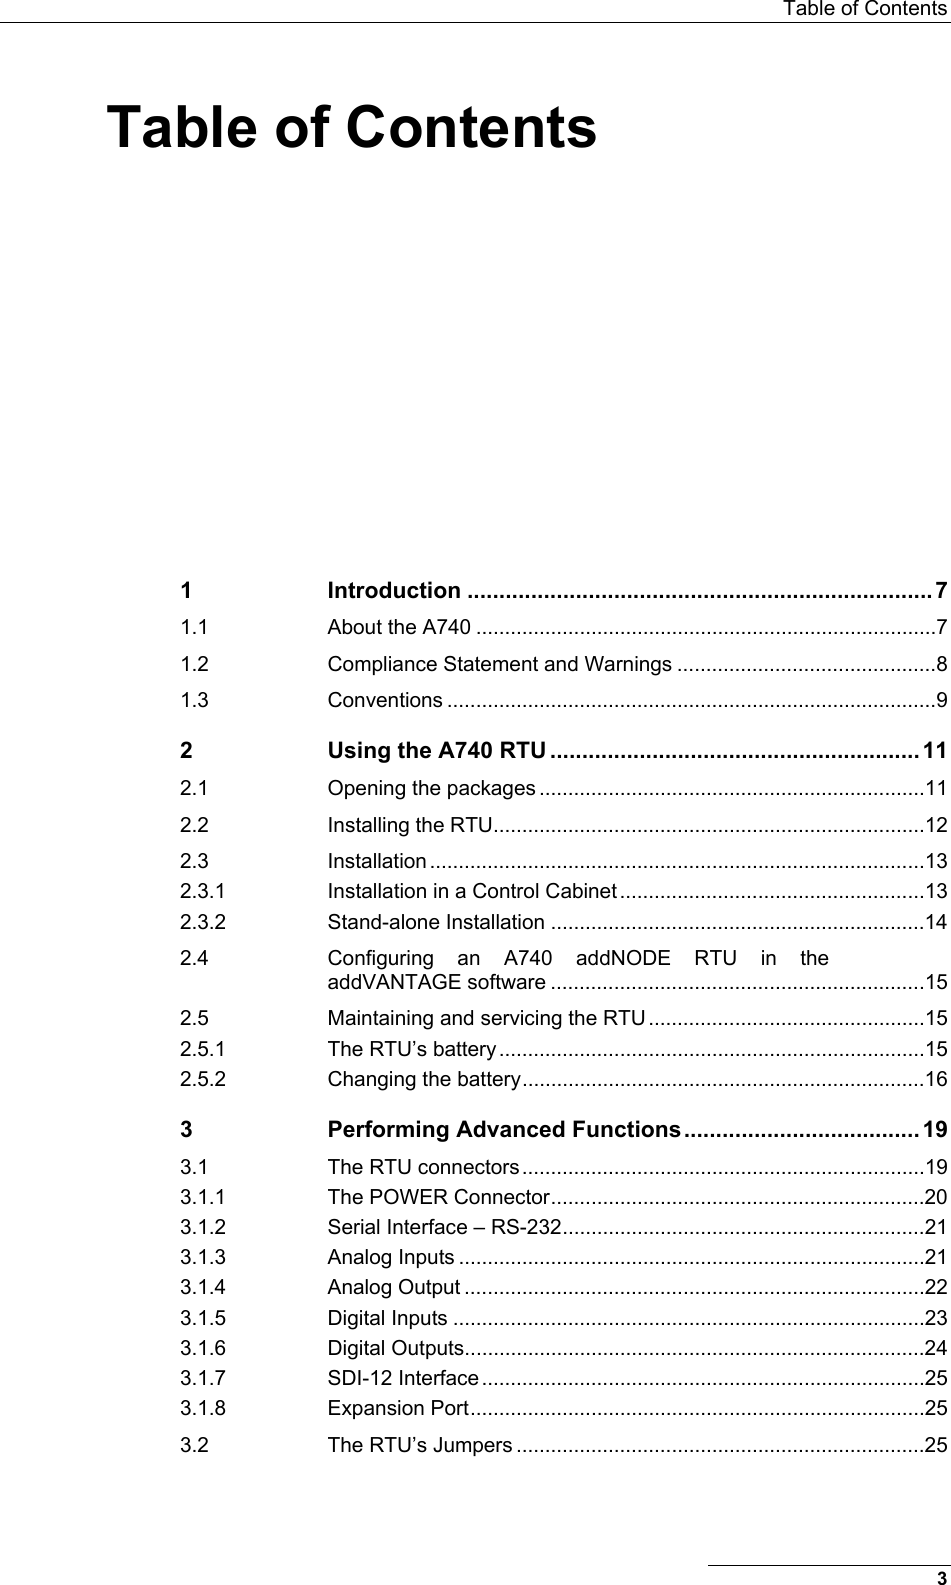  Table of Contents Table of Contents 1 Introduction .........................................................................7 1.1 About the A740 ................................................................................7 1.2 Compliance Statement and Warnings .............................................8 1.3 Conventions .....................................................................................9 2 Using the A740 RTU ..........................................................11 2.1 Opening the packages ...................................................................11 2.2 Installing the RTU...........................................................................12 2.3 Installation ......................................................................................13 2.3.1 Installation in a Control Cabinet .....................................................13 2.3.2 Stand-alone Installation .................................................................14 2.4 Configuring an A740 addNODE RTU in the addVANTAGE software .................................................................15 2.5 Maintaining and servicing the RTU ................................................15 2.5.1 The RTU’s battery ..........................................................................15 2.5.2 Changing the battery......................................................................16 3 Performing Advanced Functions.....................................19 3.1 The RTU connectors......................................................................19 3.1.1 The POWER Connector.................................................................20 3.1.2 Serial Interface – RS-232...............................................................21 3.1.3 Analog Inputs .................................................................................21 3.1.4 Analog Output ................................................................................22 3.1.5 Digital Inputs ..................................................................................23 3.1.6 Digital Outputs................................................................................24 3.1.7 SDI-12 Interface.............................................................................25 3.1.8 Expansion Port...............................................................................25 3.2 The RTU’s Jumpers .......................................................................25 3 